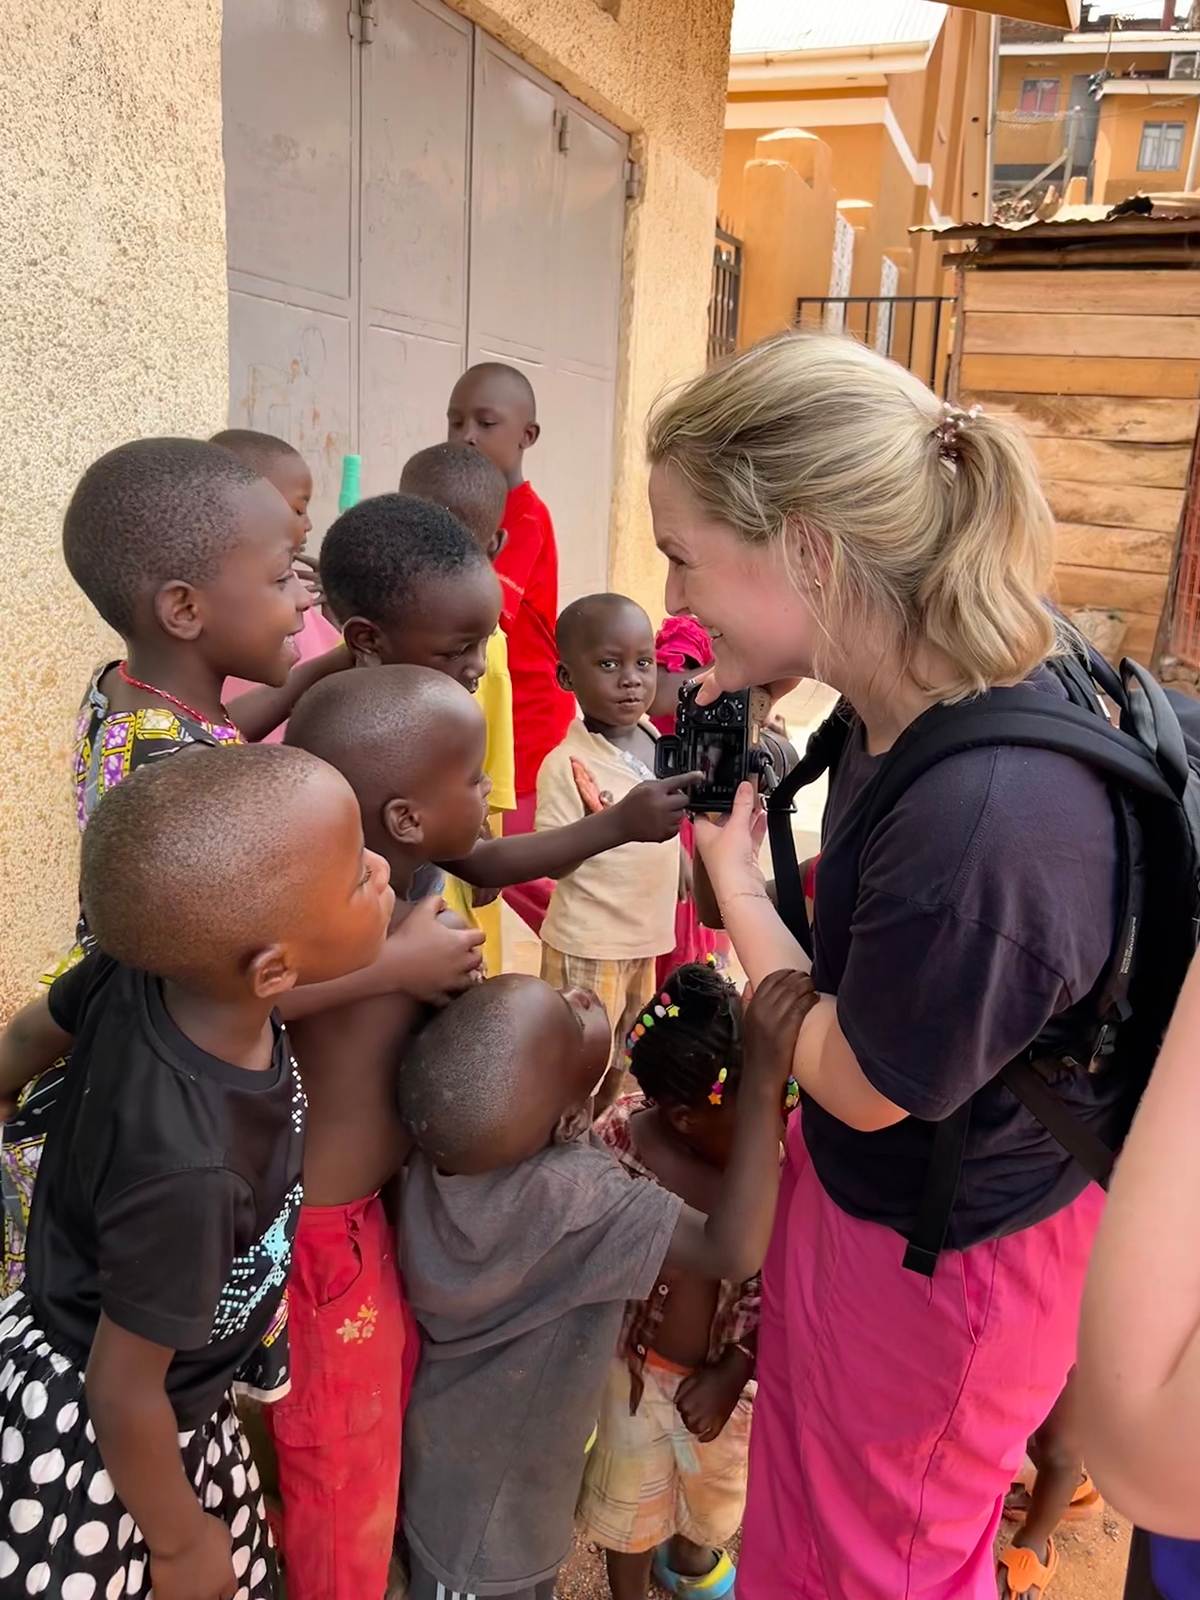 Emily Shafer interacts with children in Katanga, one of the slums of Kampala. “The local kids were mesmerized by my camera and wanted to see and touch it,” she said. “This recurred throughout the three weeks. They loved the camera!”